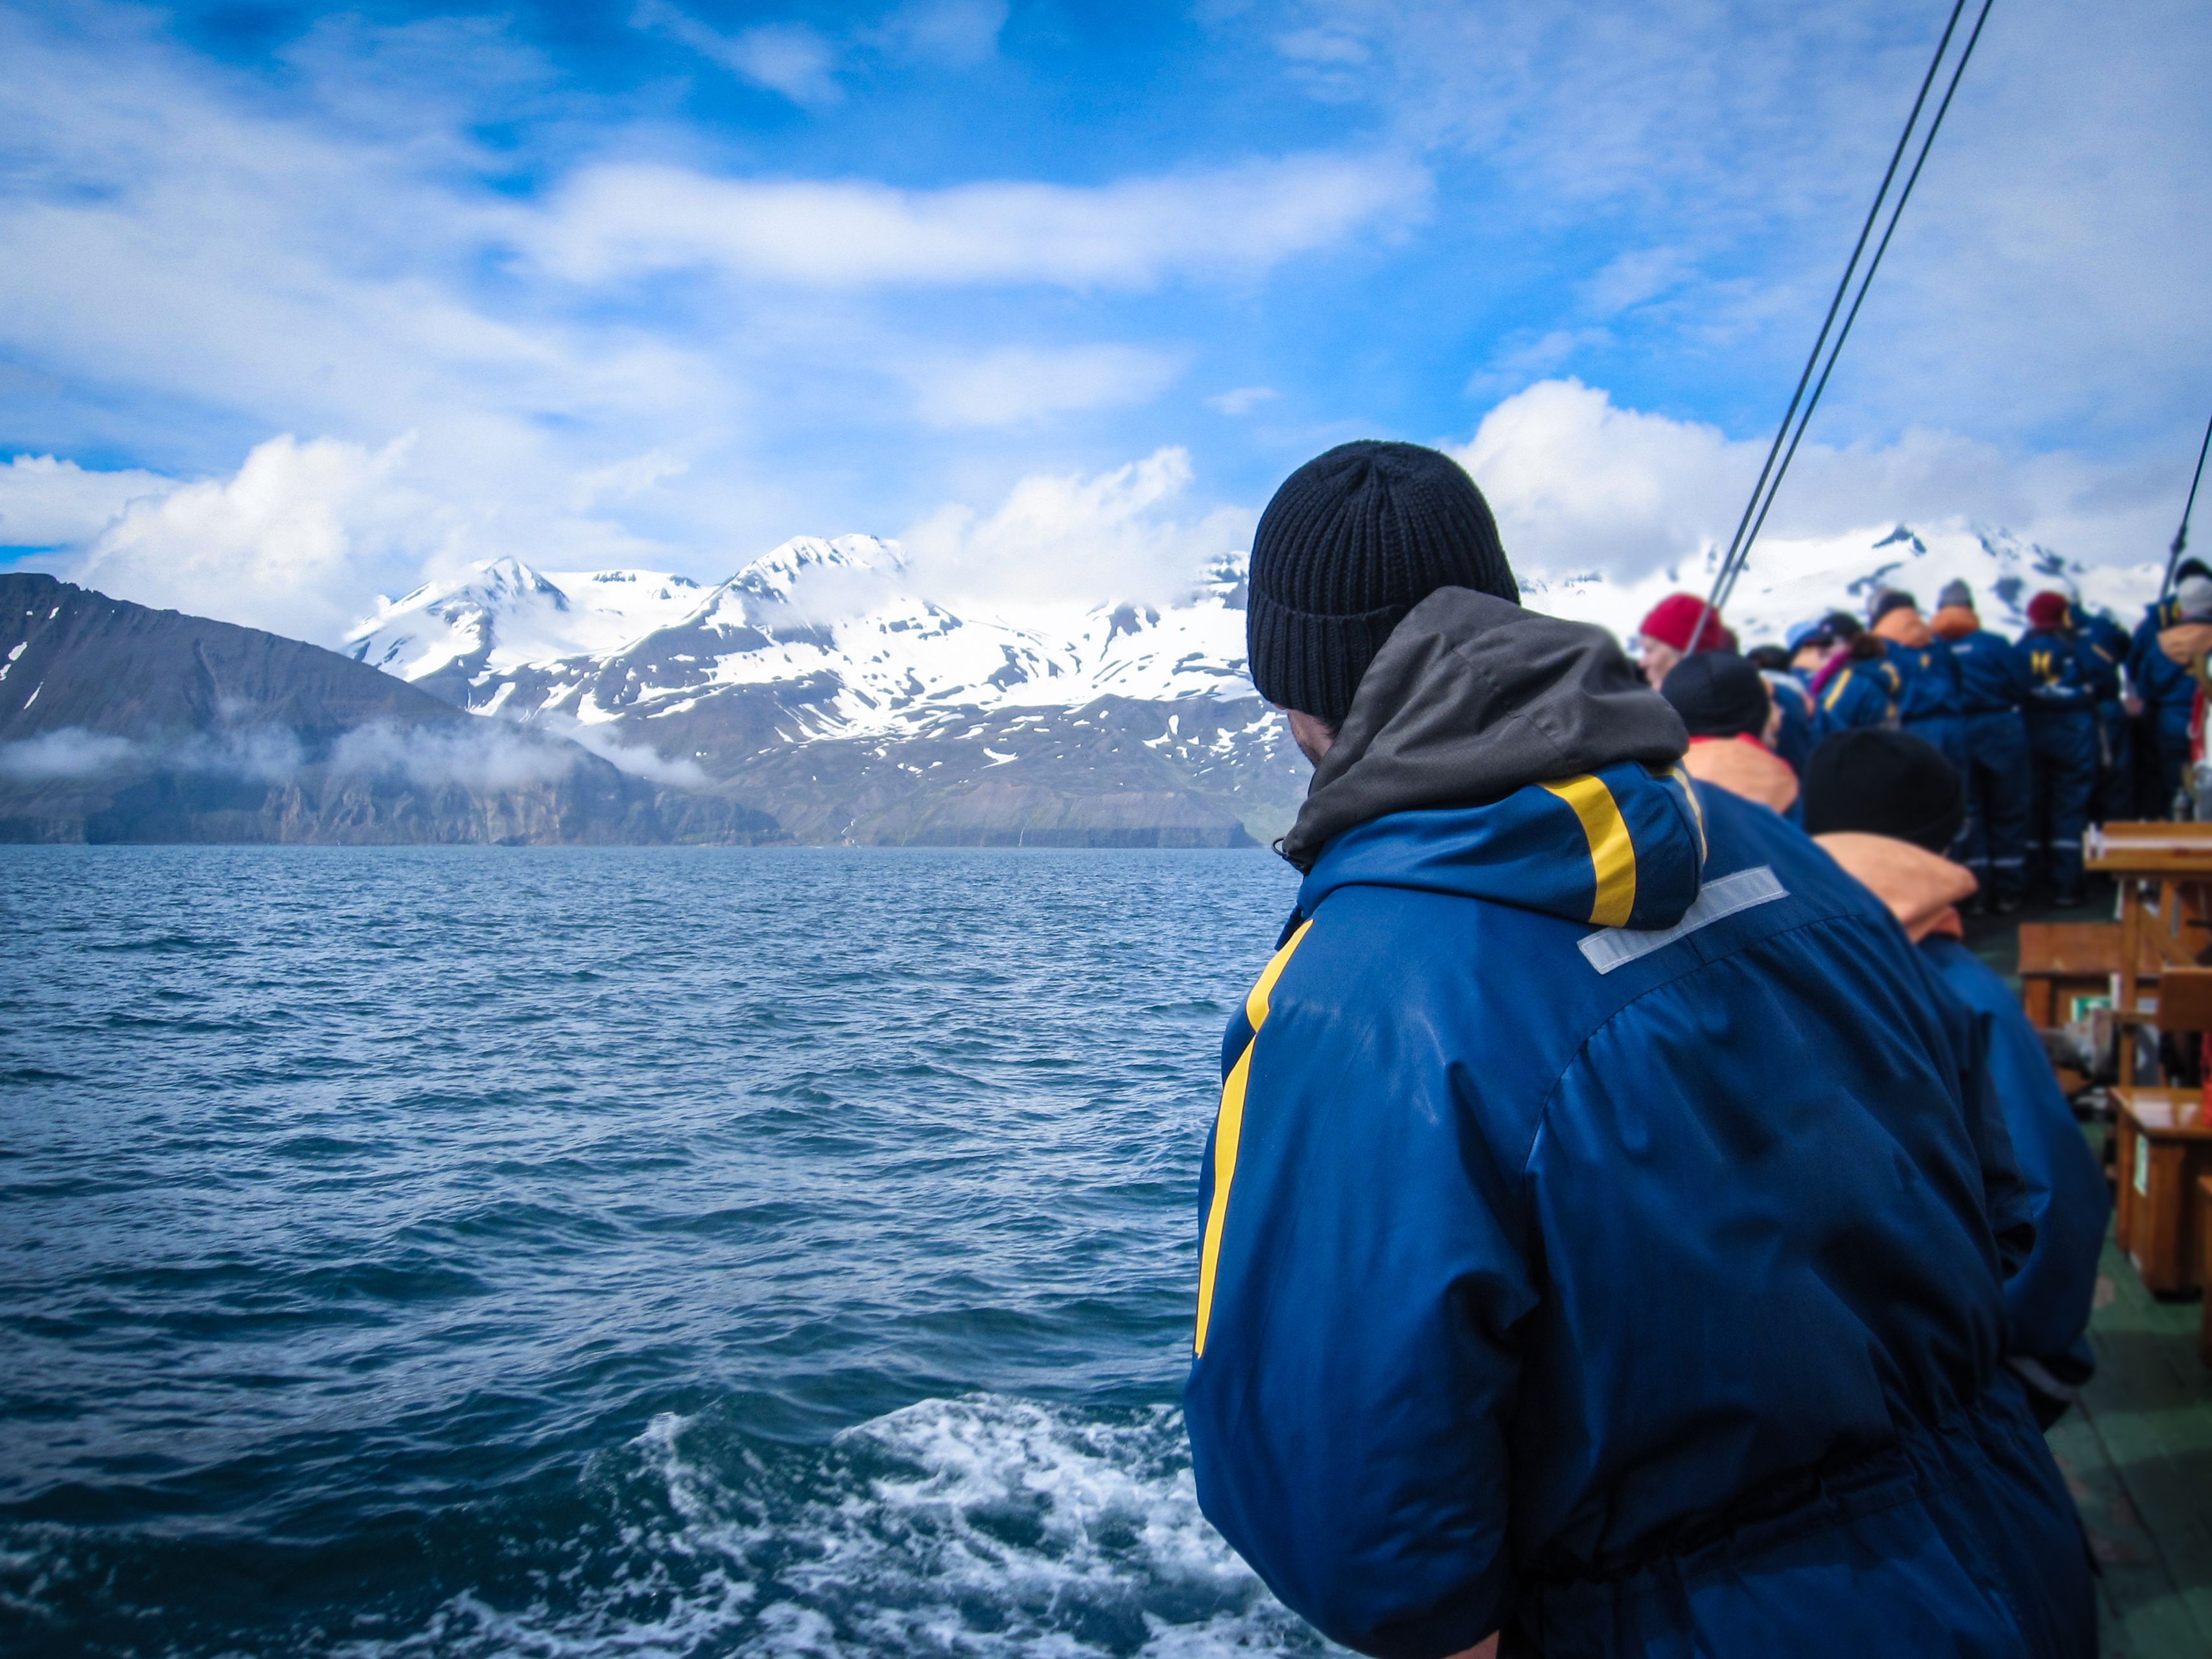 A group of whale watchers enjoying an unforgettable whale watching experience